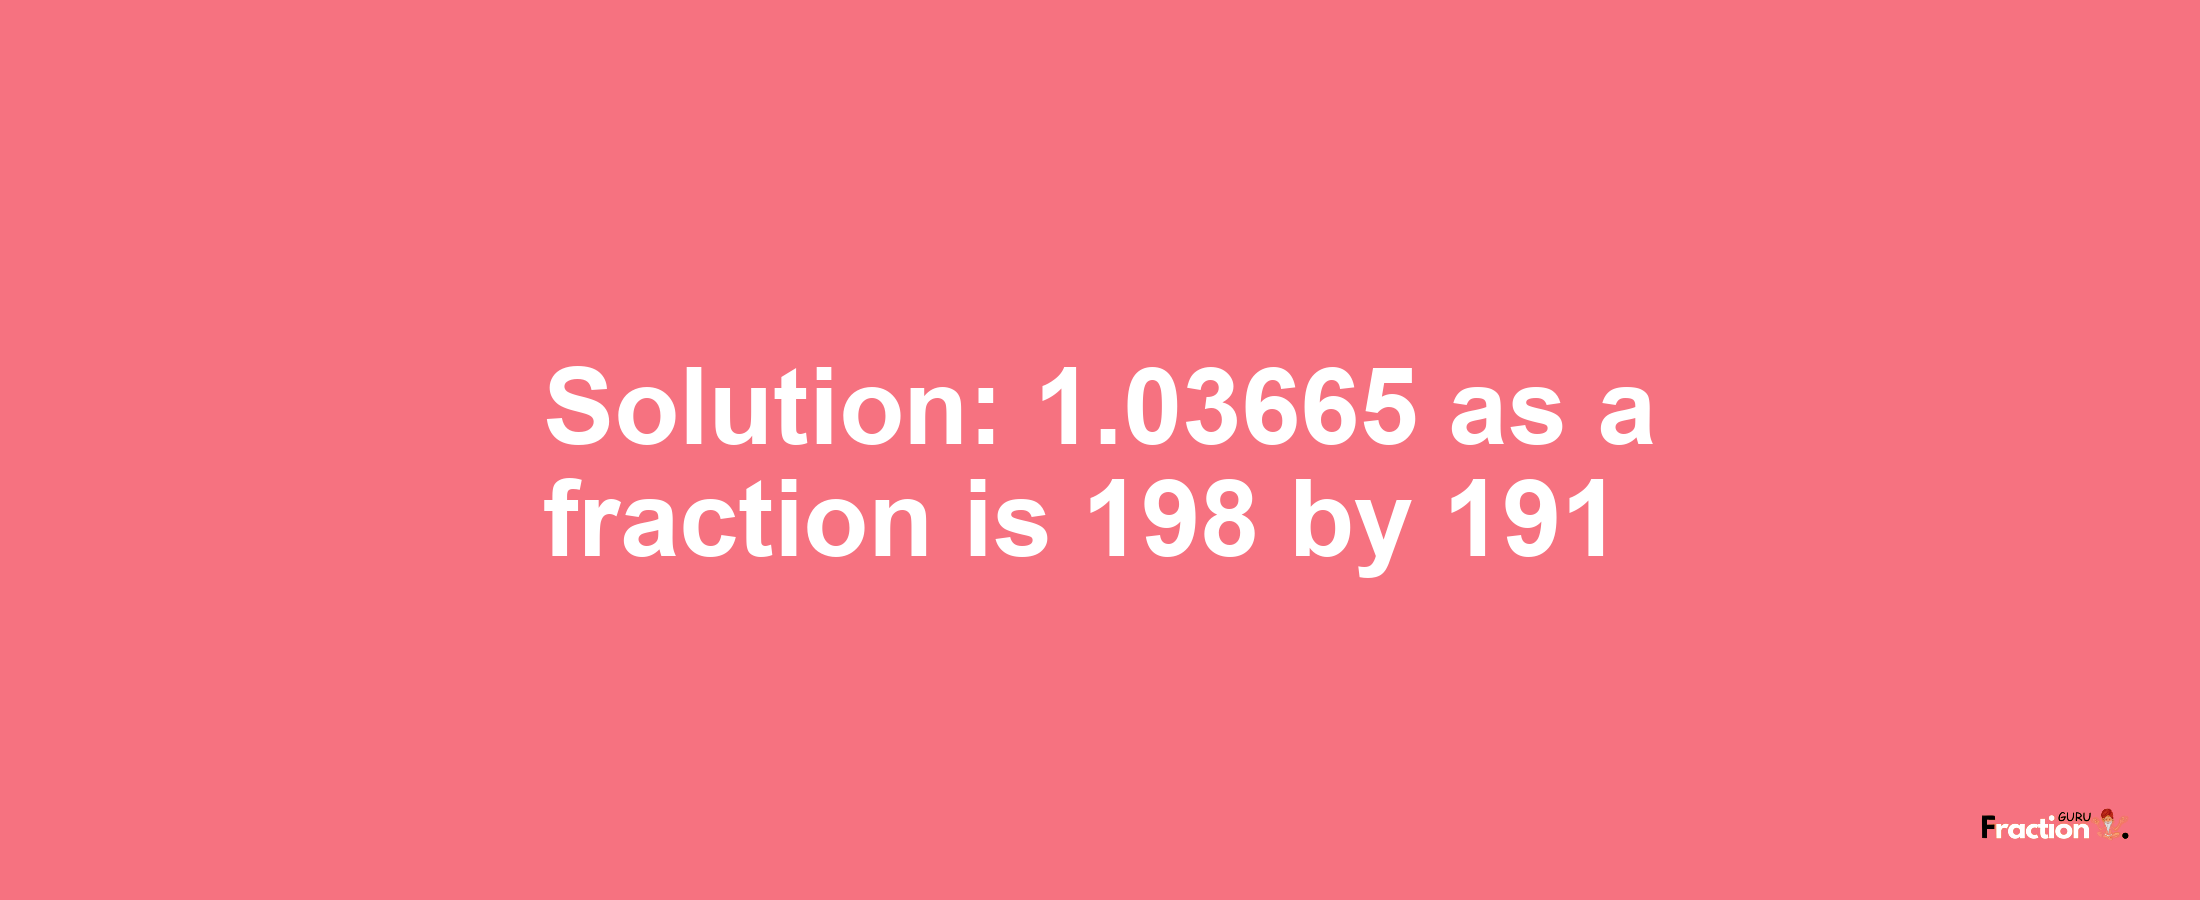 Solution:1.03665 as a fraction is 198/191